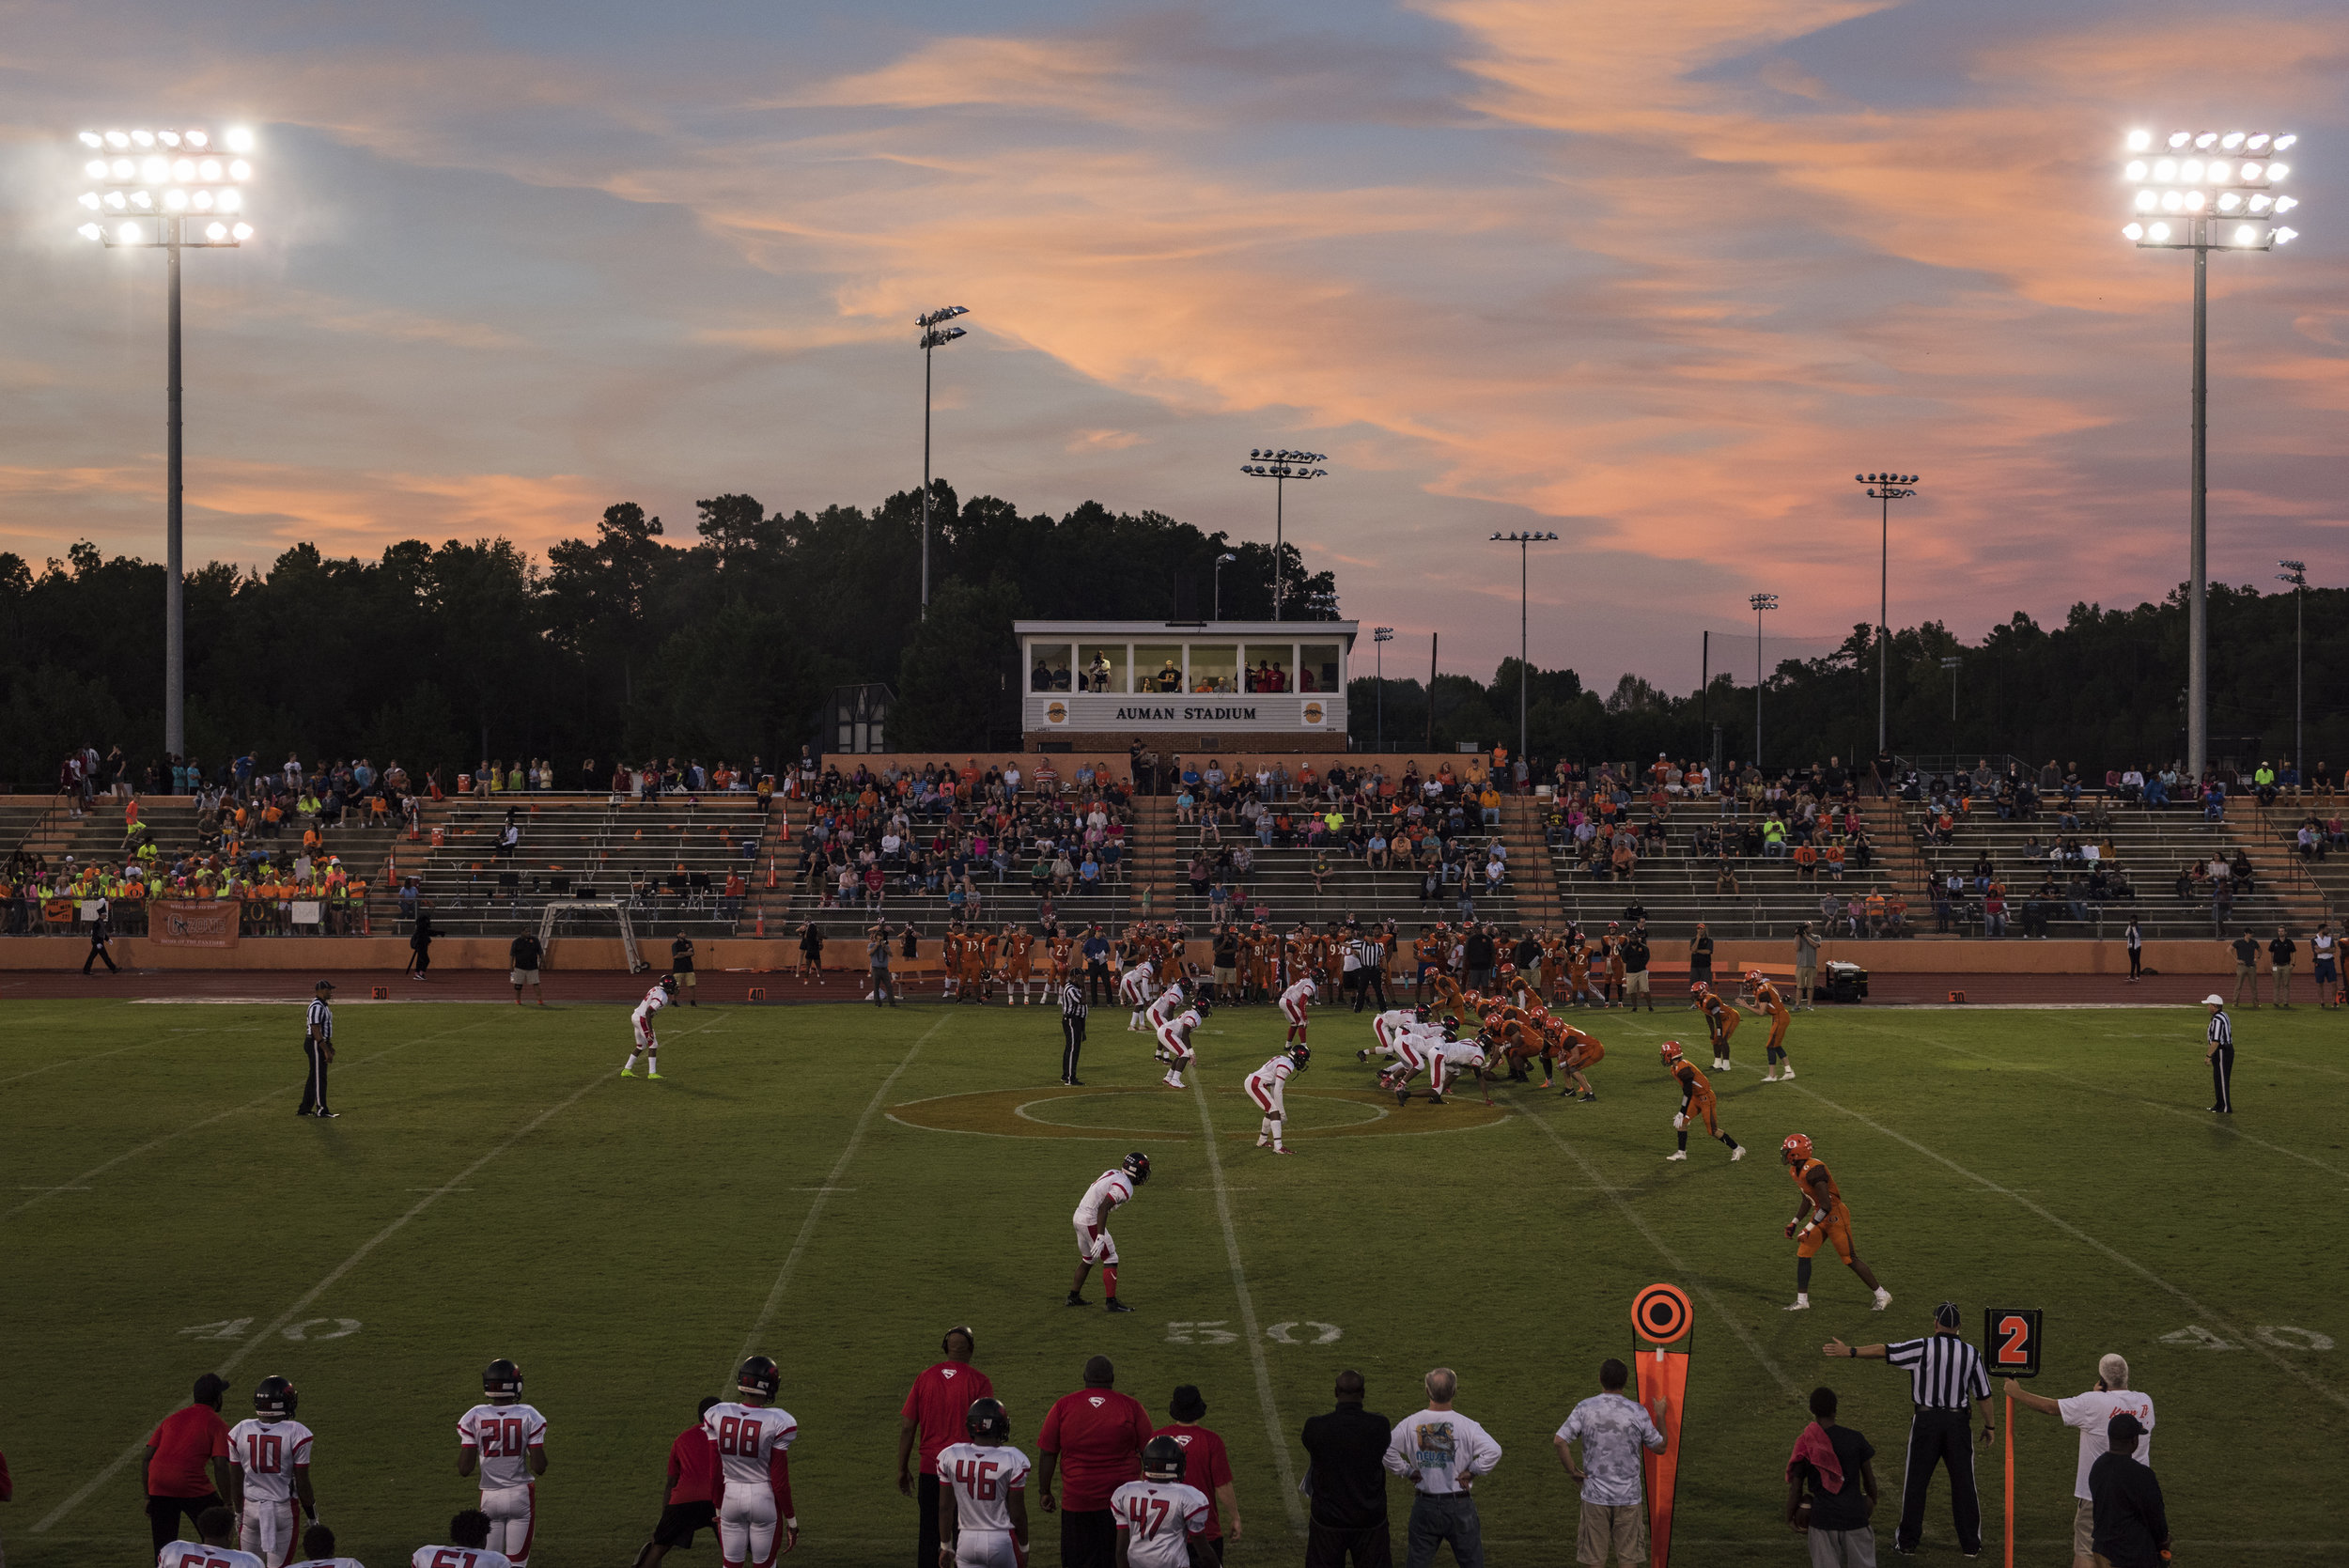  The Southern Durham Spartans play against Orange High School. The Spartans lost the game 27-17 and it ultimately cost them a spot in the playoffs. Despite Southern Durham (5-6) having a better record than Orange (3-8) at the end of the season, all t